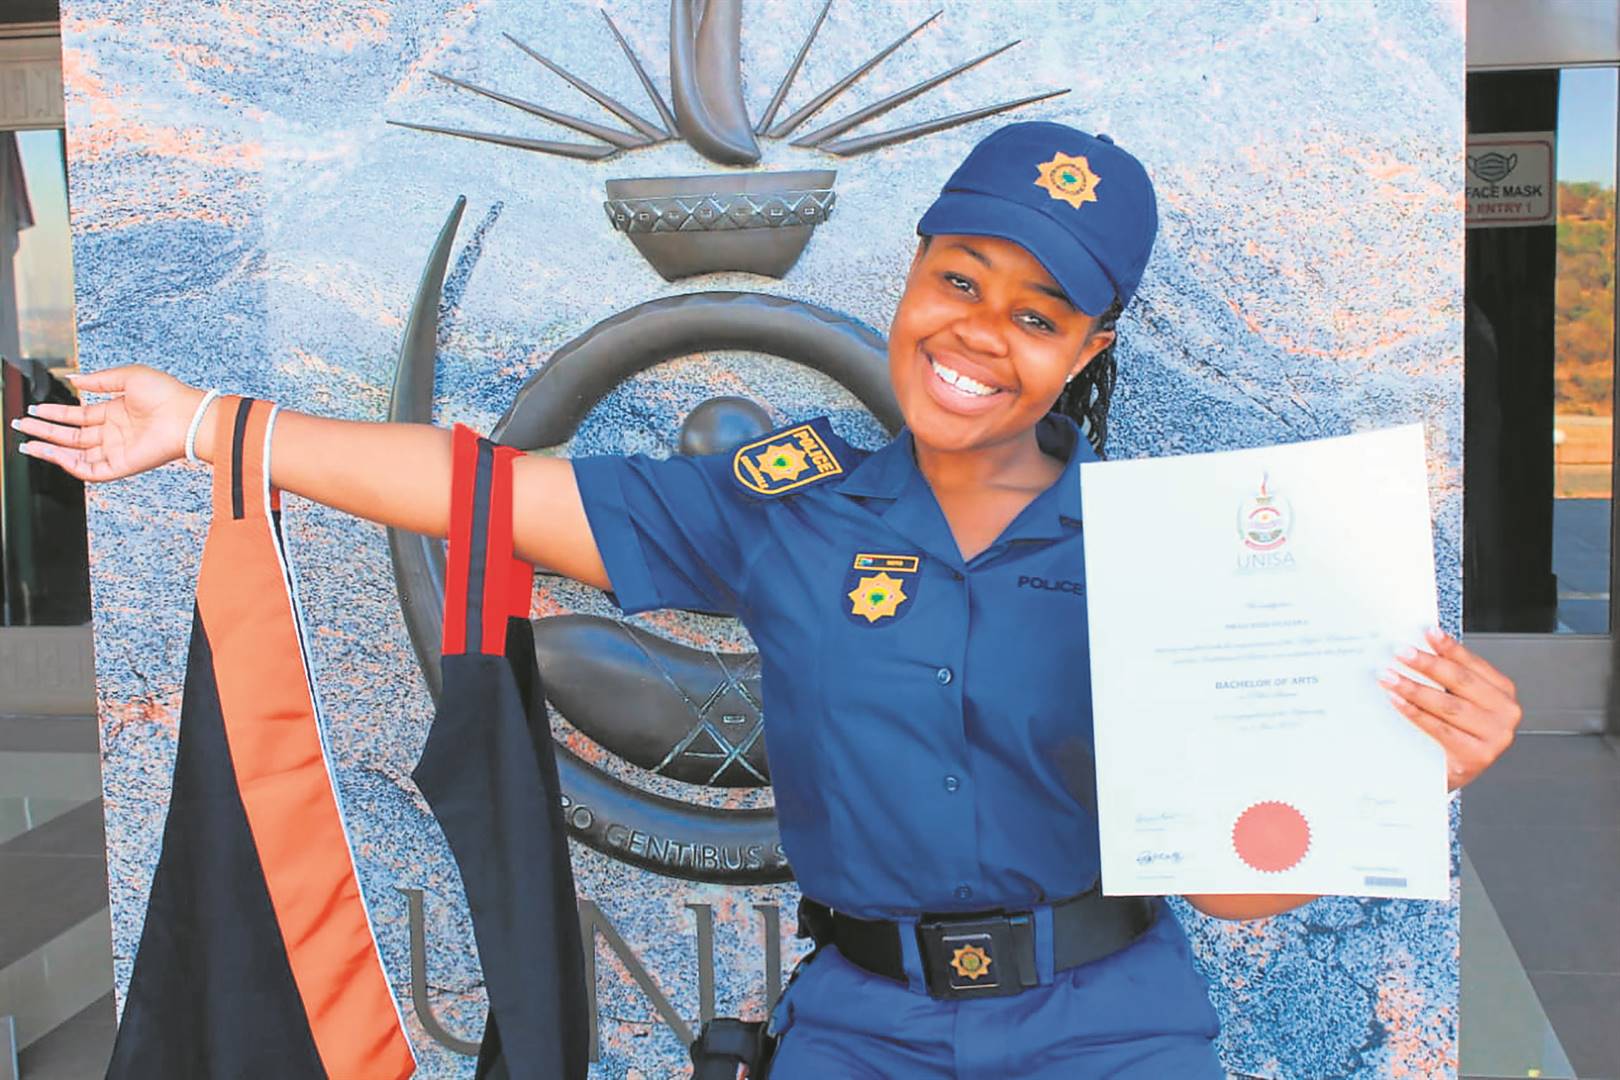 Detective Mbali Ngaleka has been praised for obtaining two qualifications.